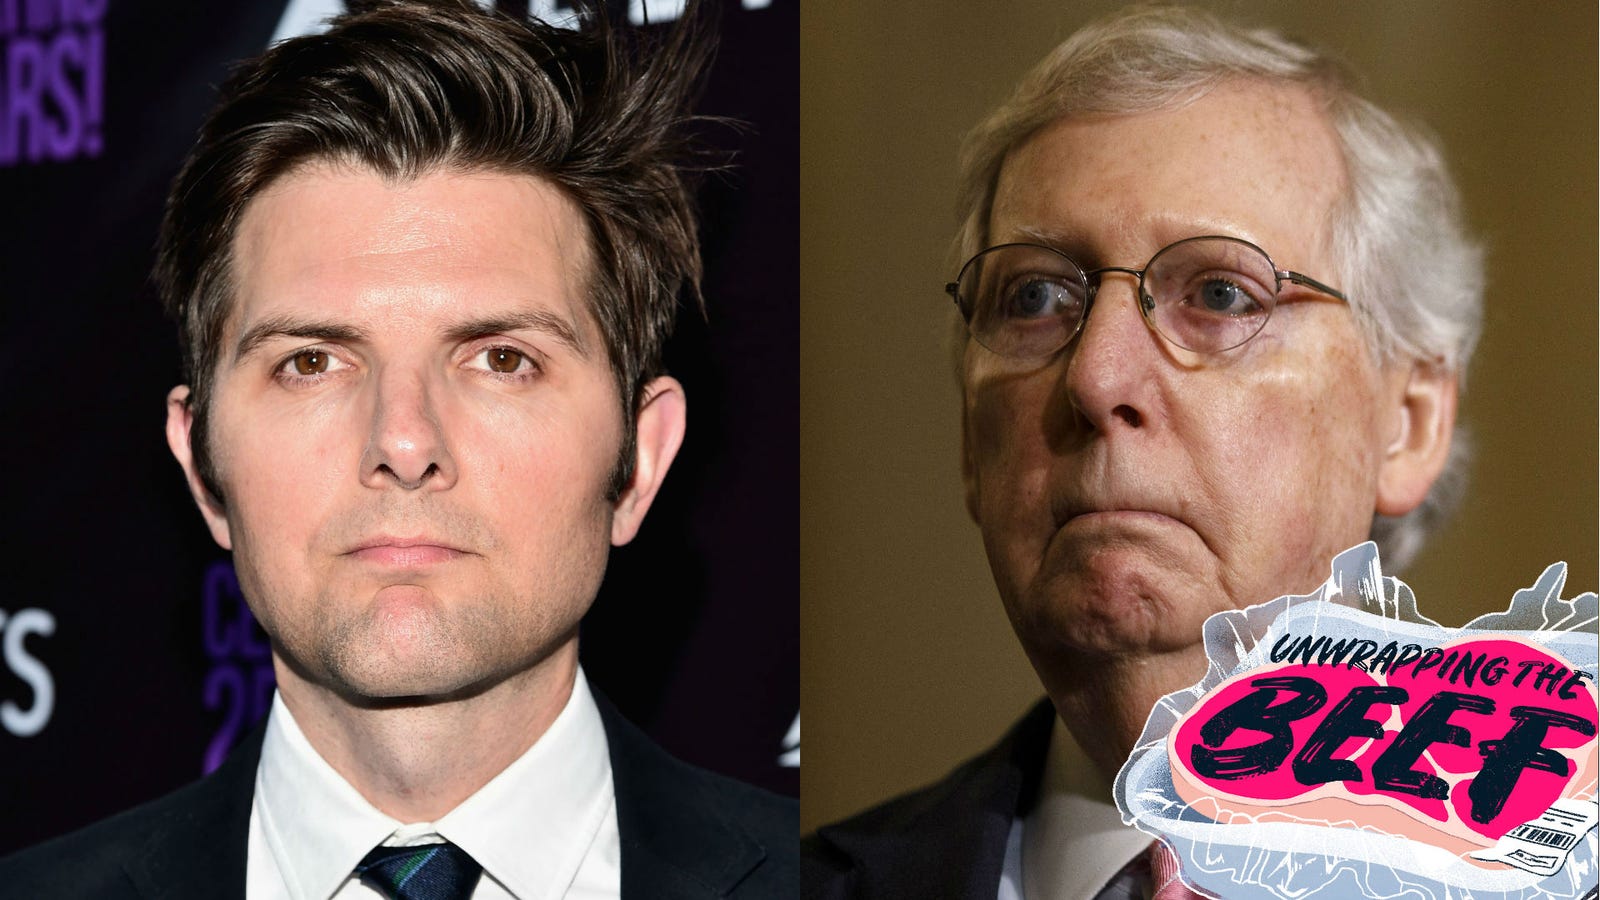 Adam Scott & Mitch McConnell's Twitter Fight Over Parks and Recreation1600 x 900